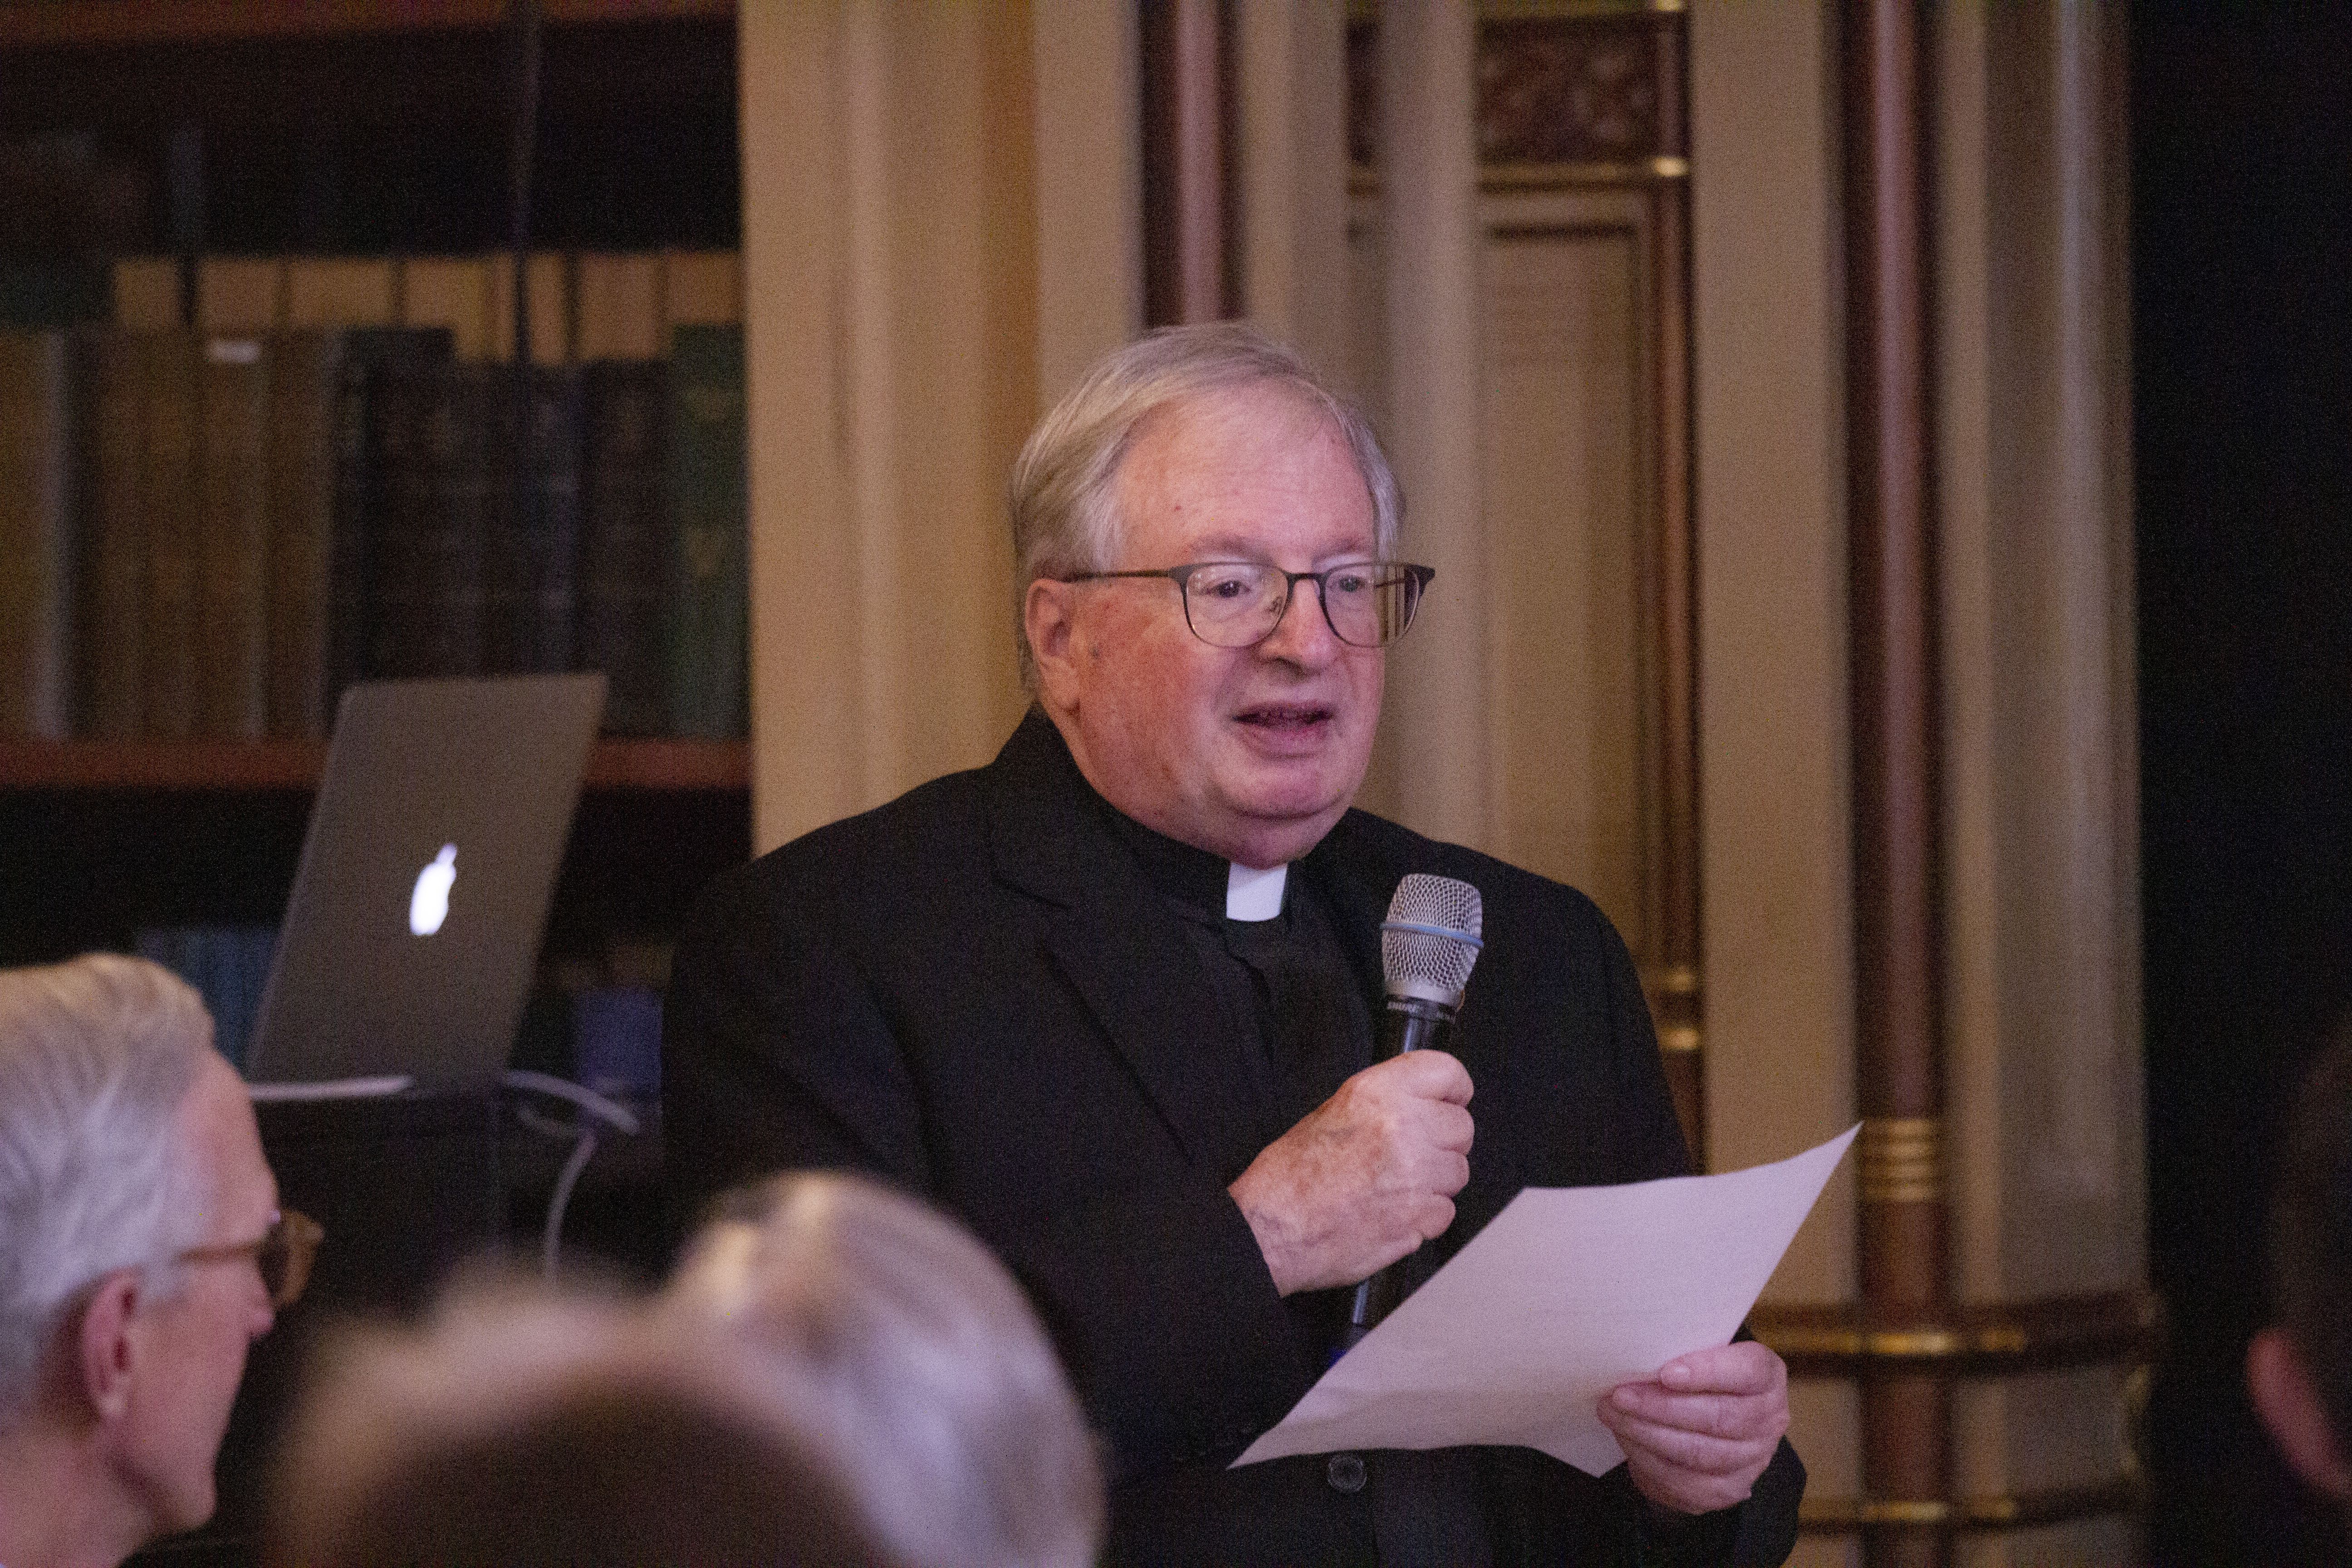 Father Drew Christiansen, professor of ethics and human development at Georgetown’s School of Foreign Service, offered a prayer at Friday's dinner for the safety of journalists around the world working to expose the truth. Image by Jin Ding. United States, 2019.